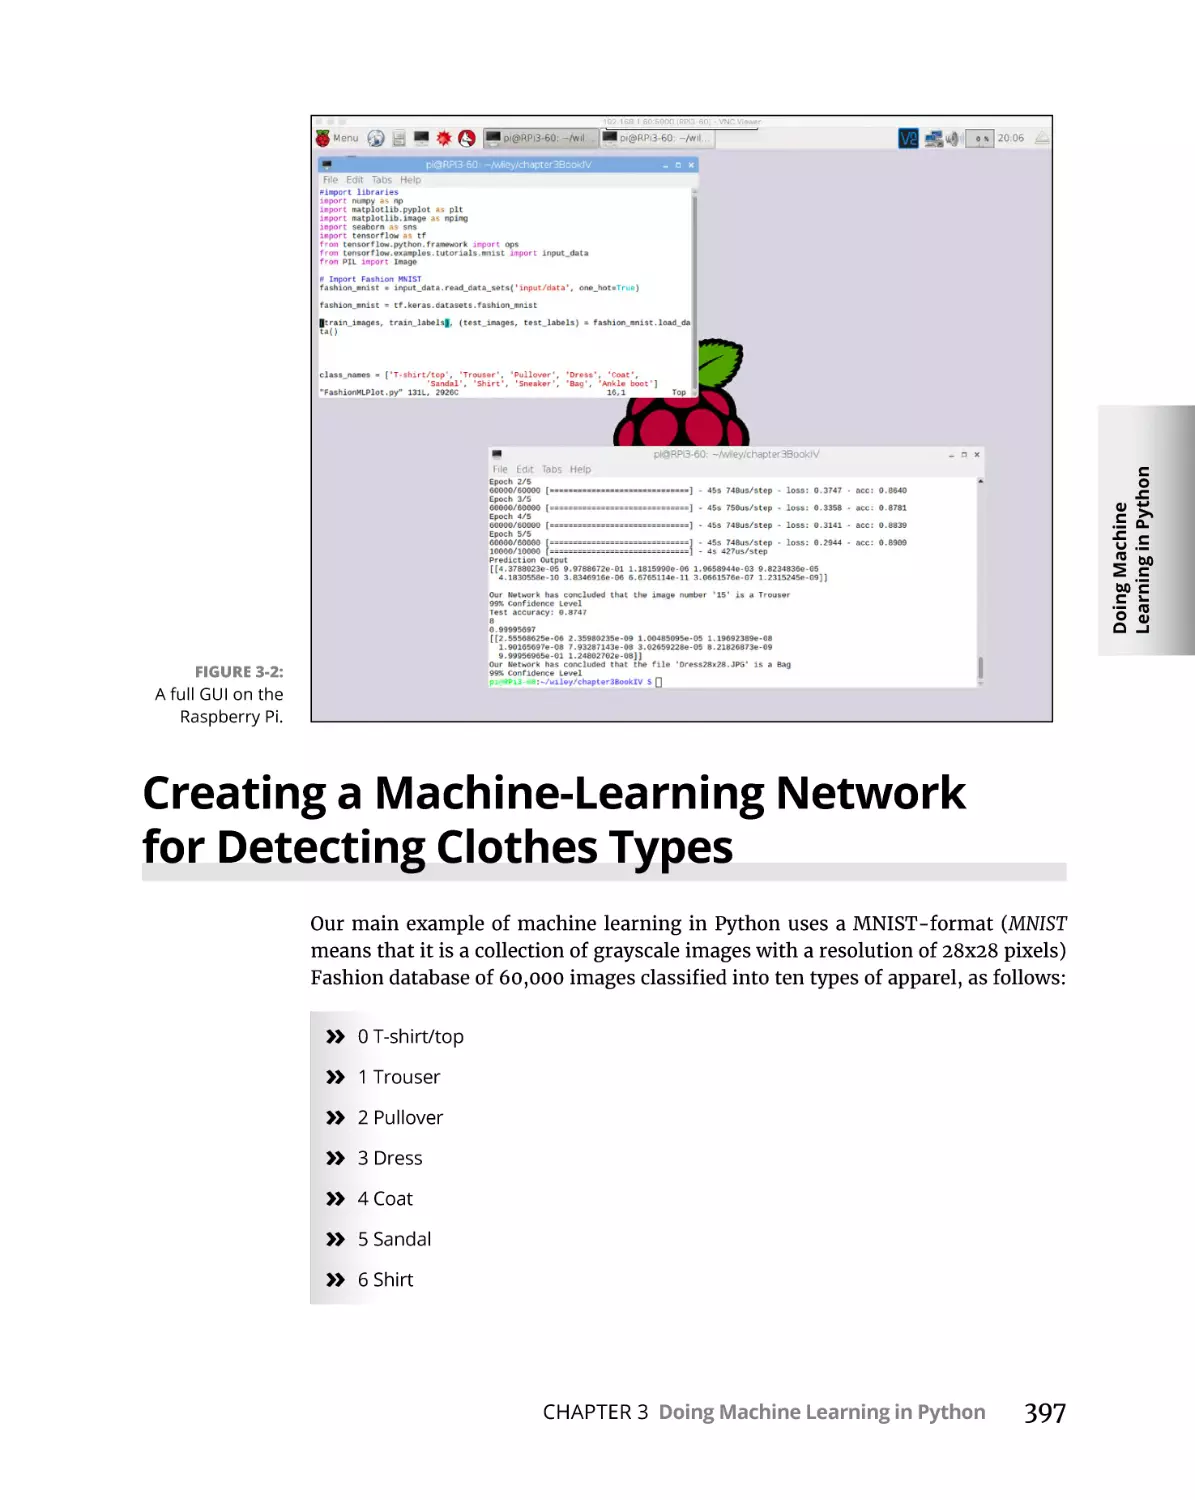 Creating a Machine-Learning Network for Detecting Clothes Types